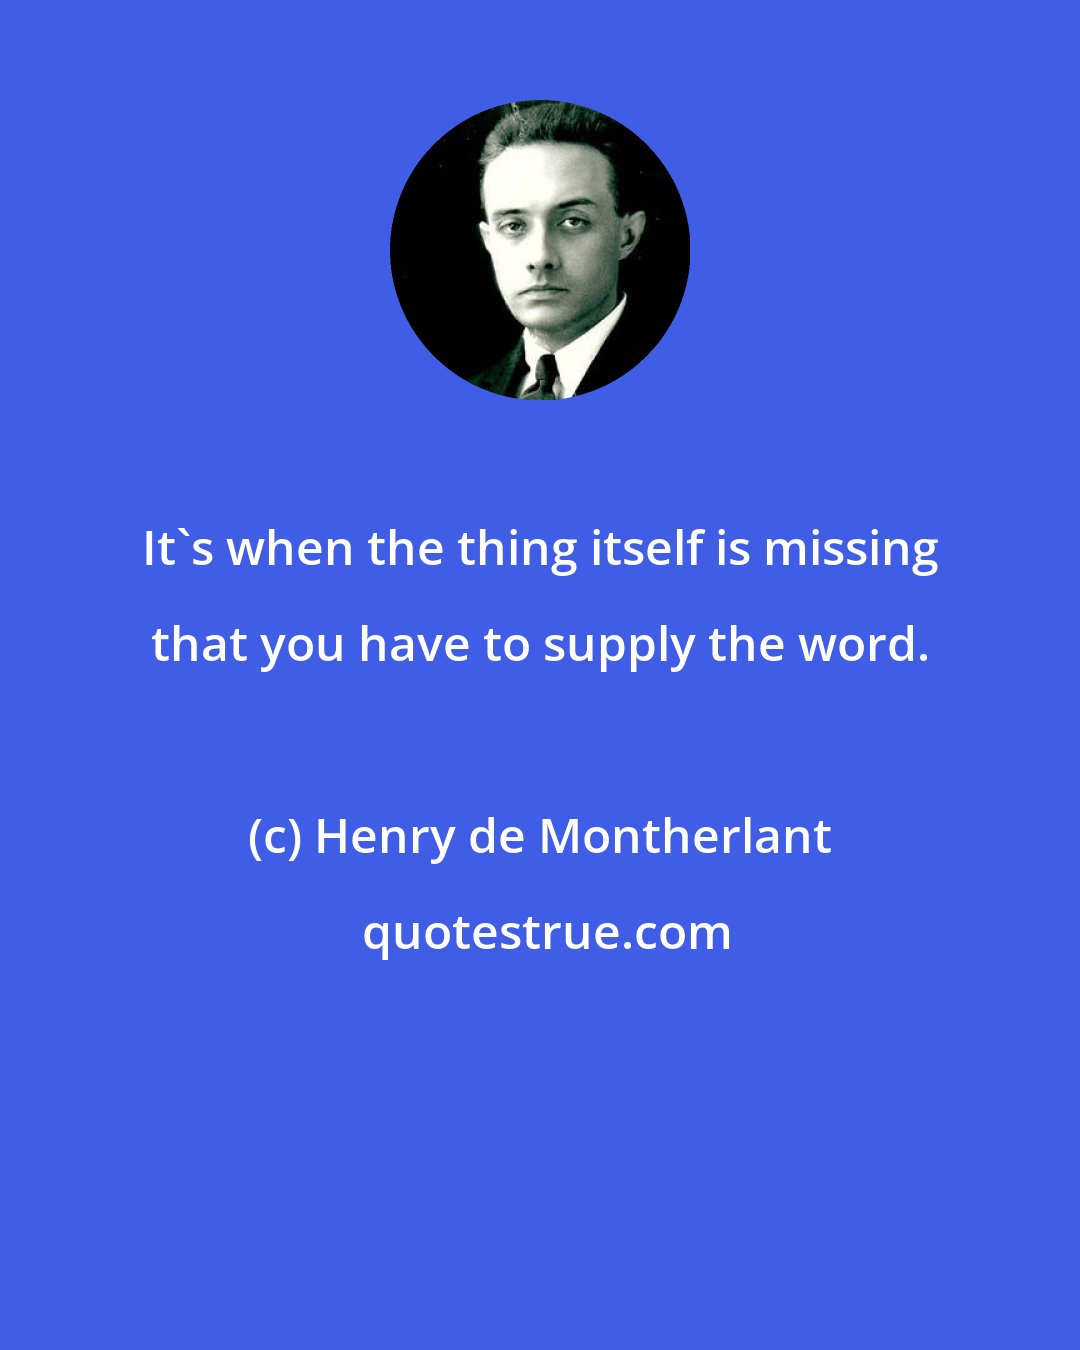 Henry de Montherlant: It's when the thing itself is missing that you have to supply the word.